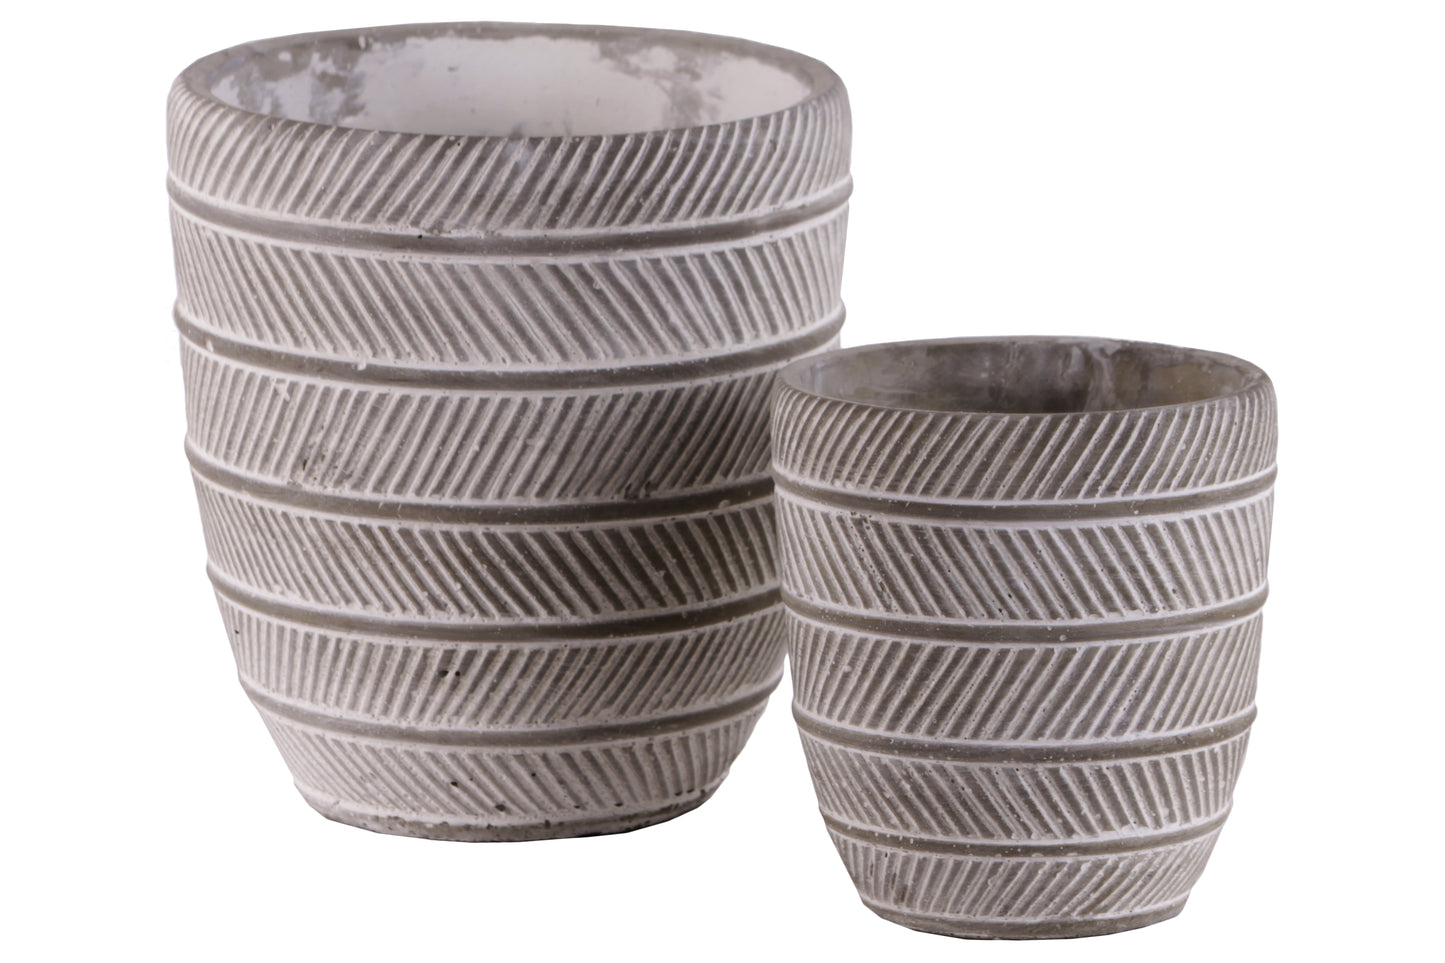 Cement Round Pot with Alternate Parrallel Lines Design Body and Tapered Bottom, Set of 2